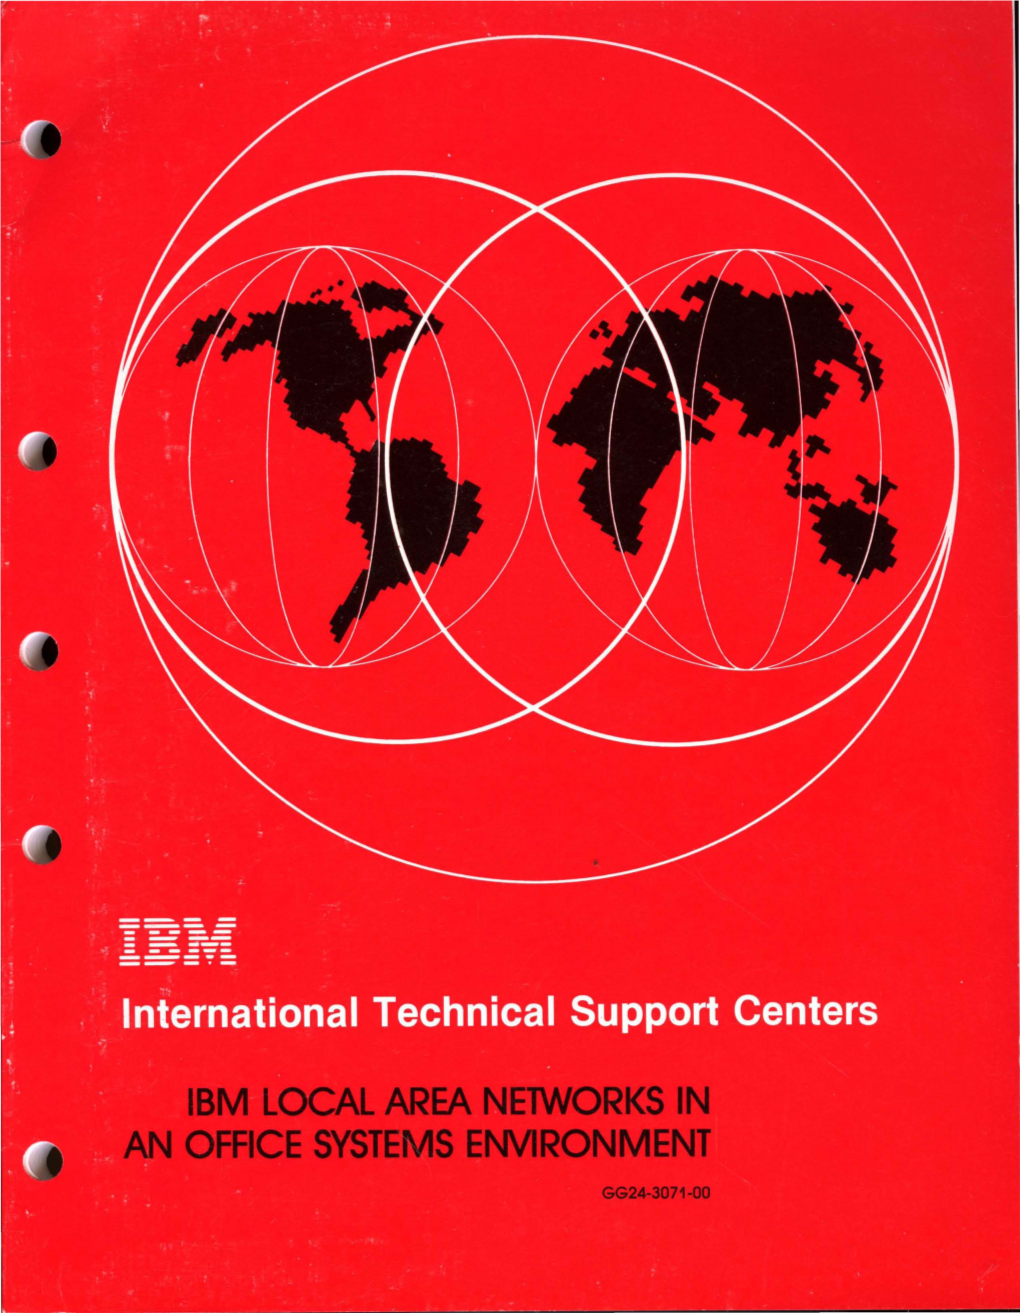 Ibm Local Area Networks in an Office Systems Environment